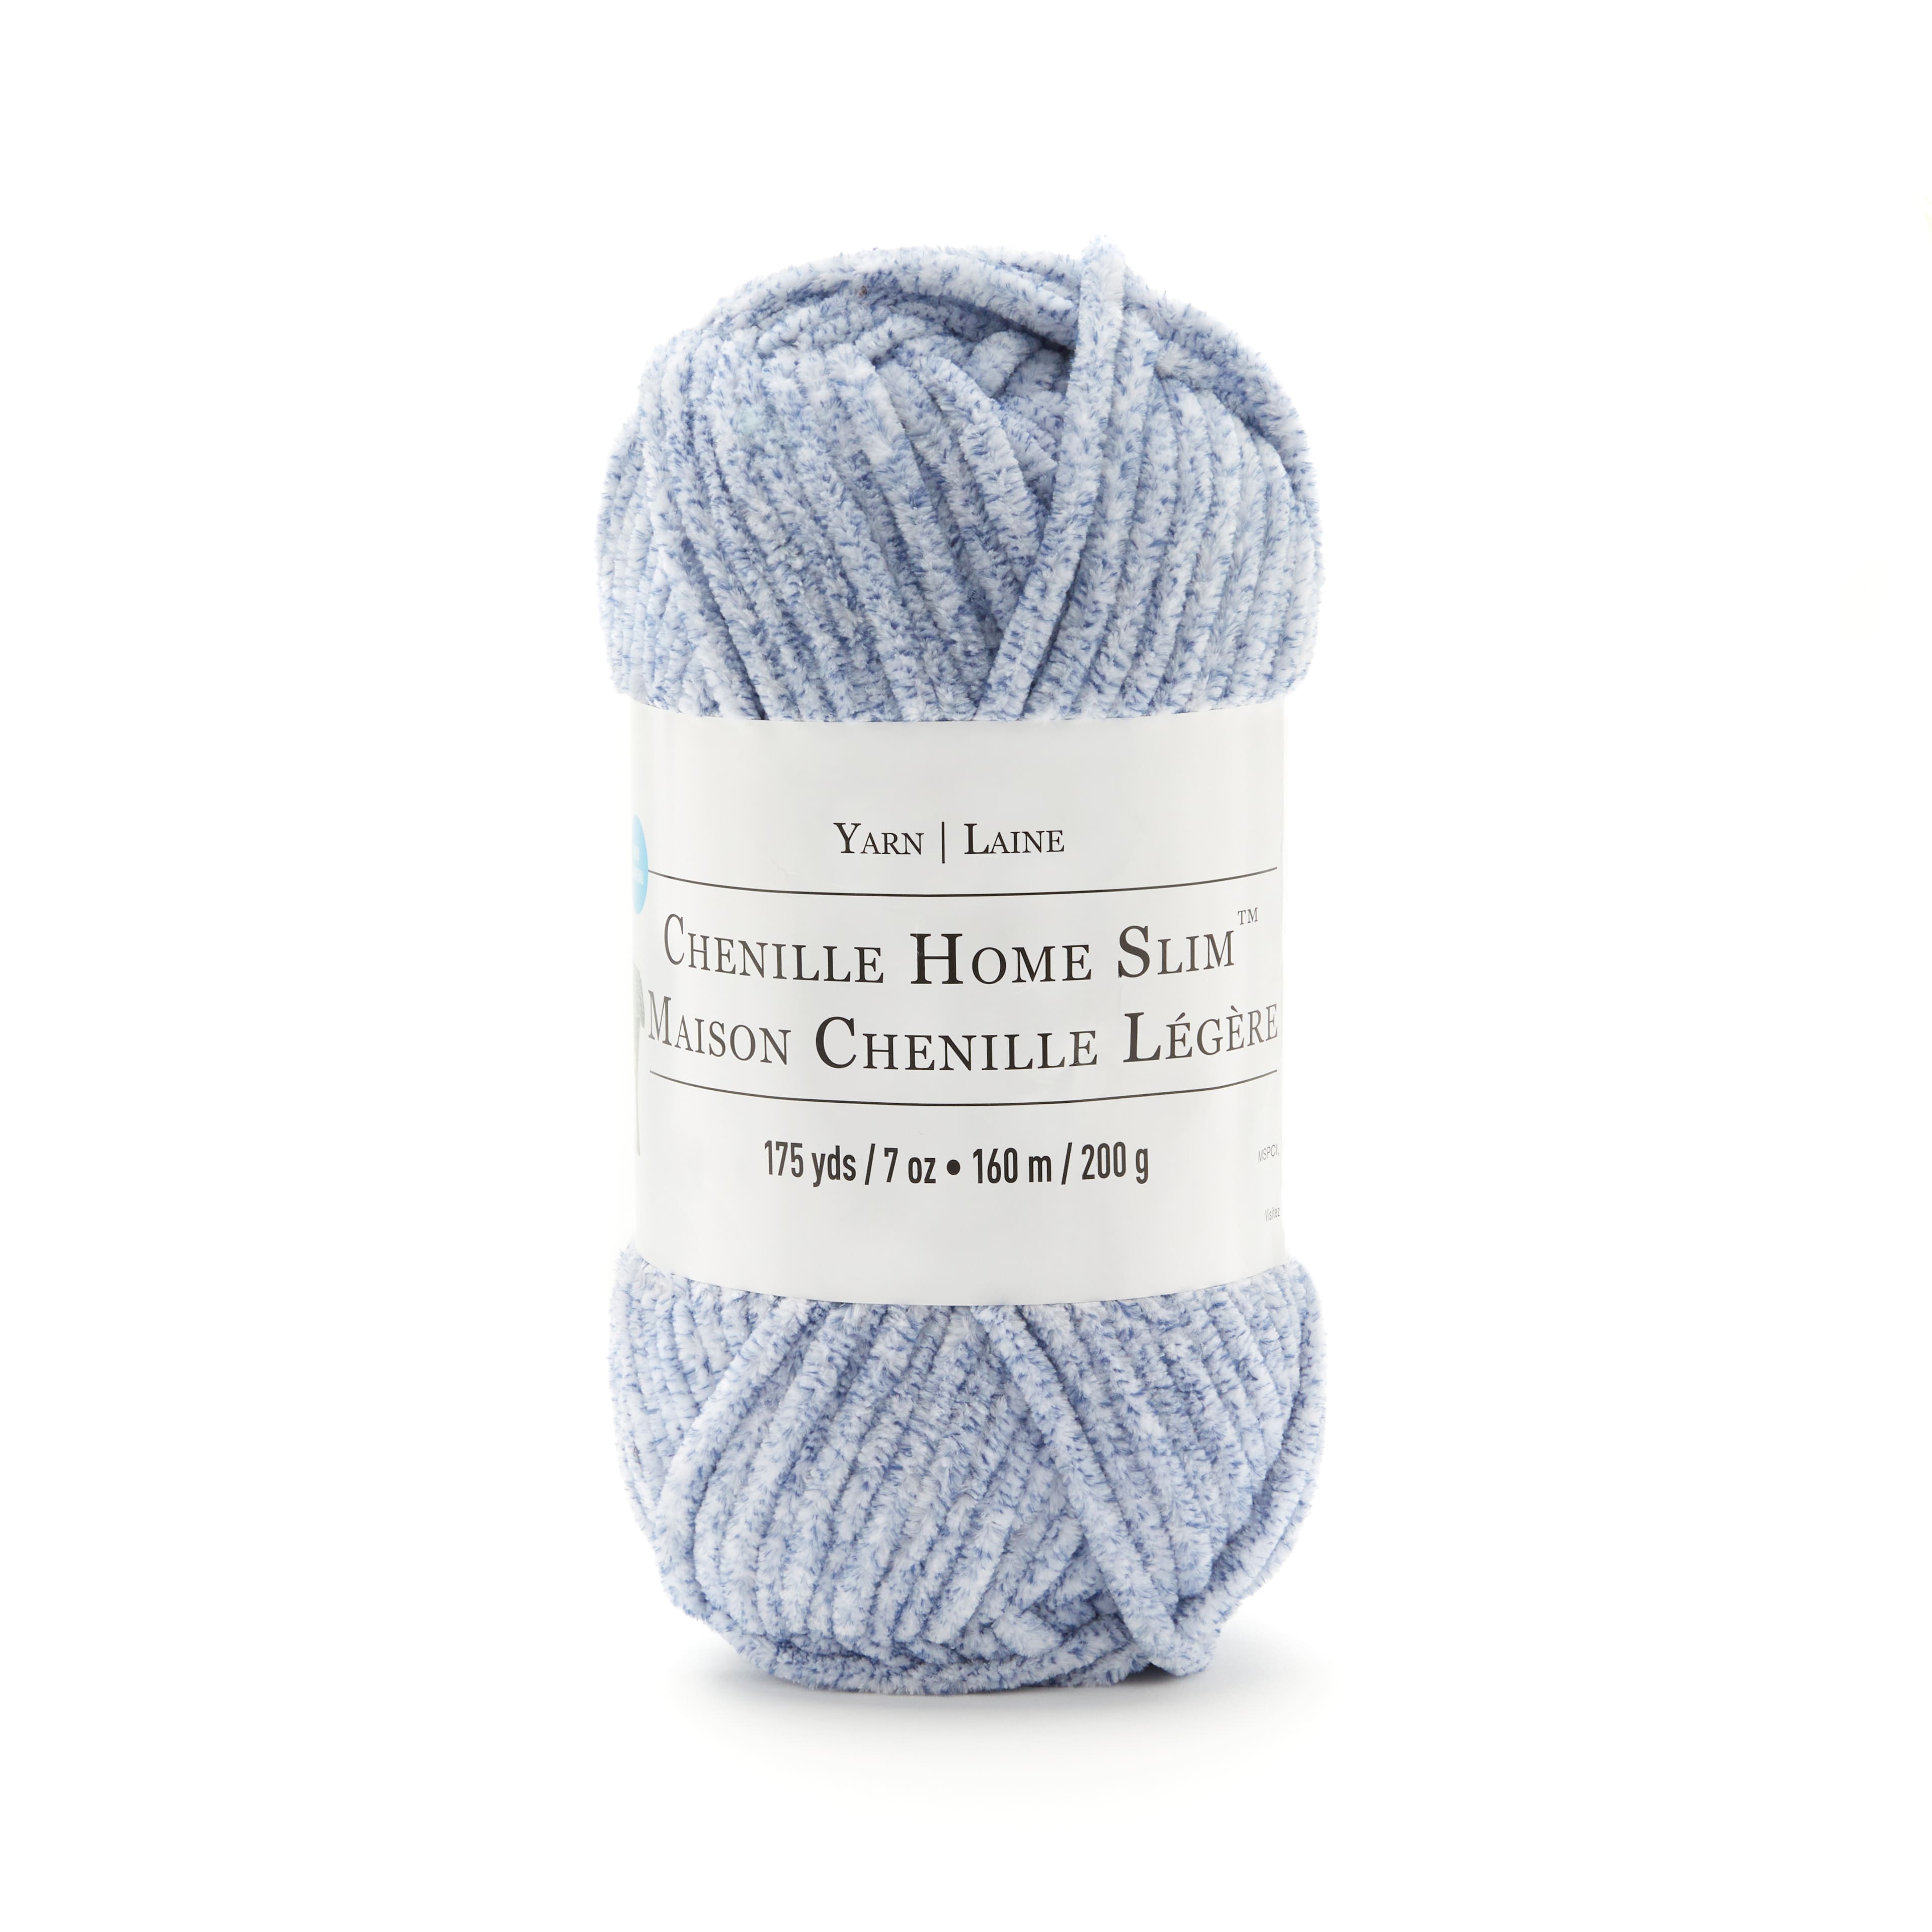 Loops & Threads Chenille Home Slim Solid Yarn - Country Blue - 8.8 oz